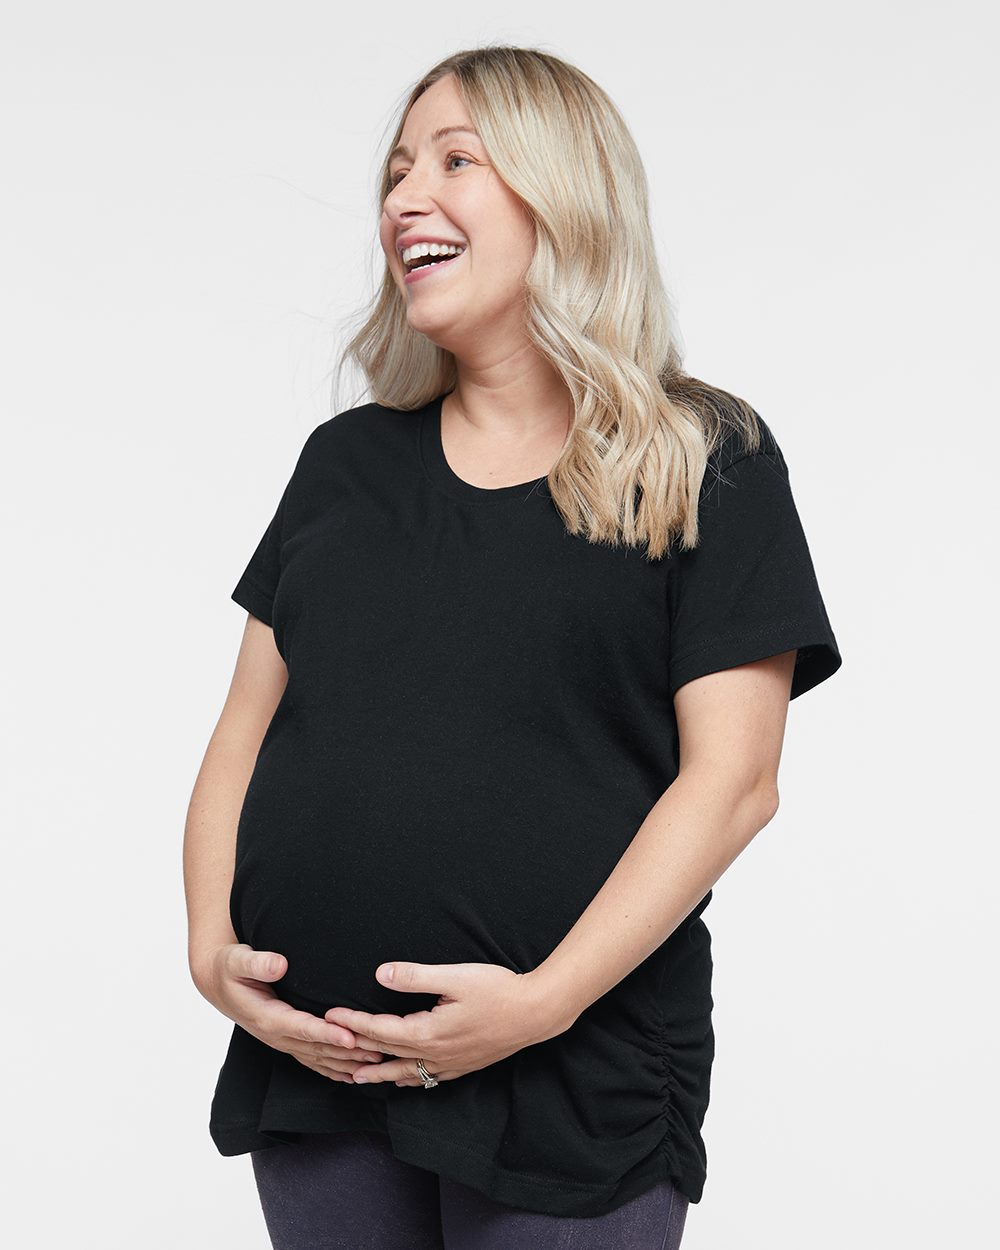 Mommy and Me - My First Concert Maternity Shirt